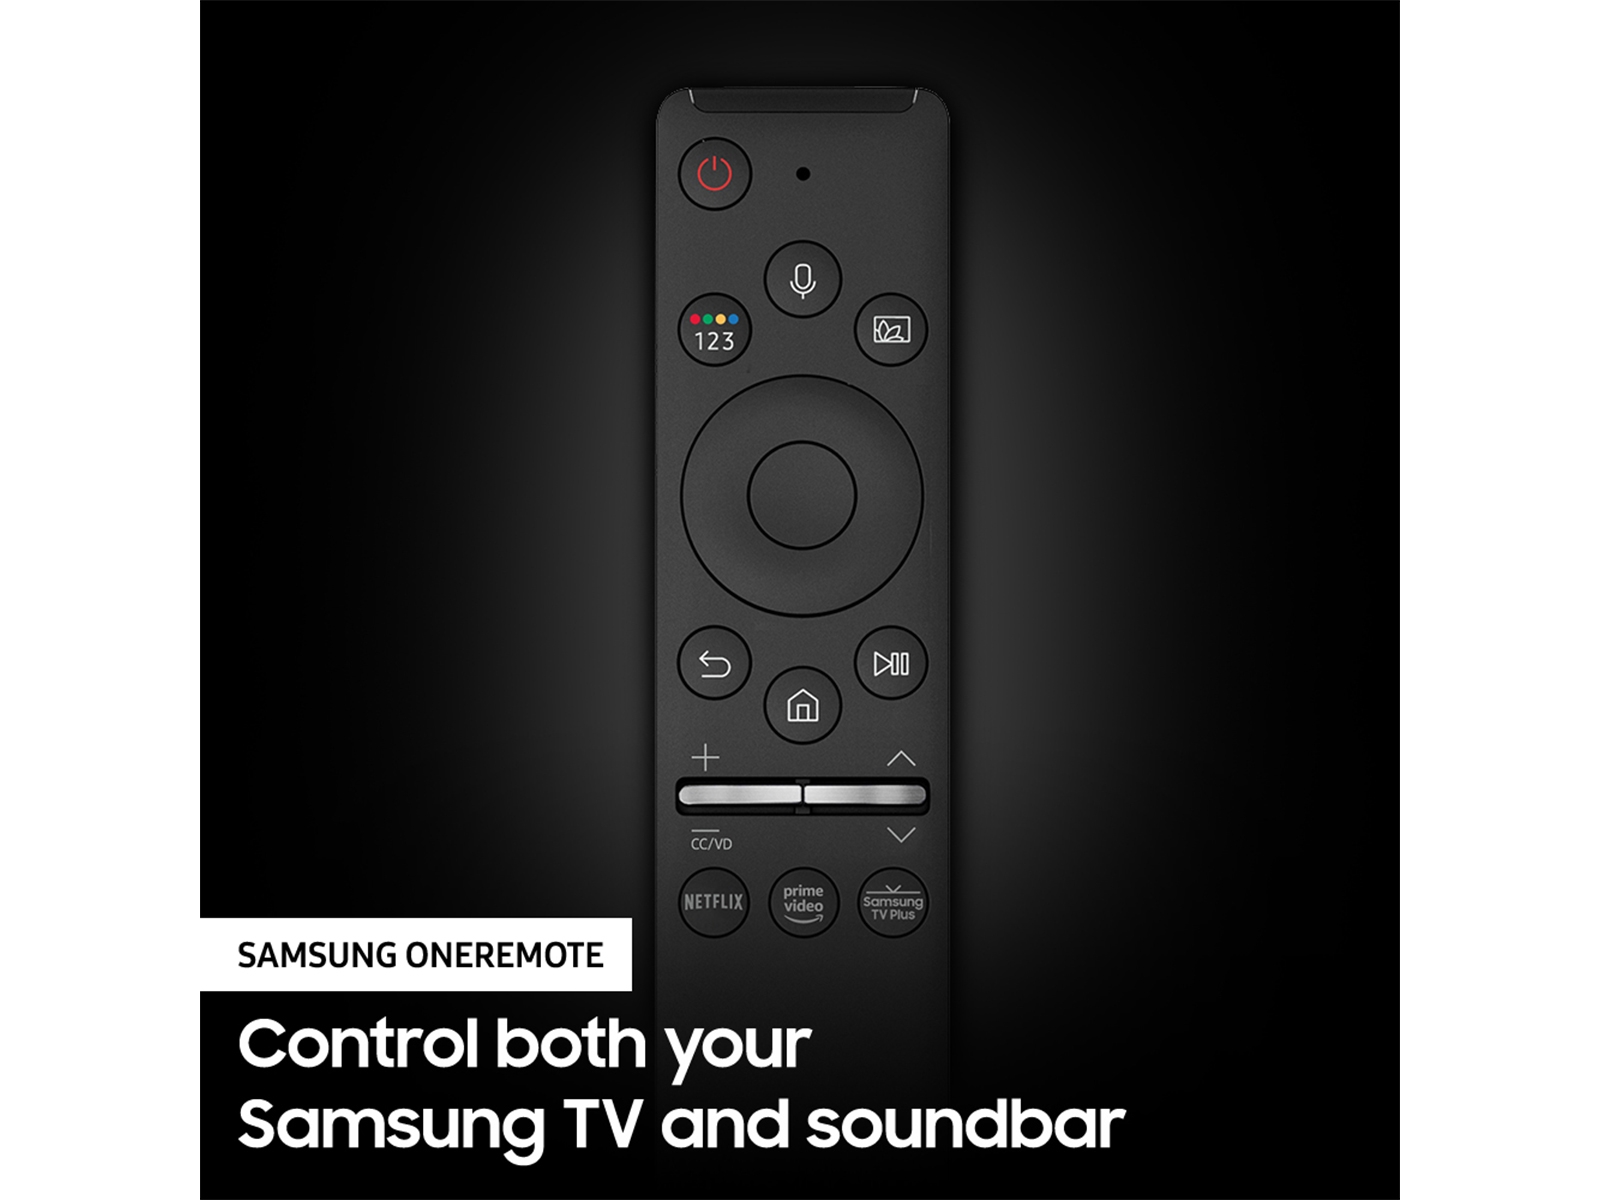 https://image-us.samsung.com/SamsungUS/home/televisions-and-home-theater/tvs/pdp/09-09-2020/t450/gallery10-1600x1200.jpg?$product-details-jpg$